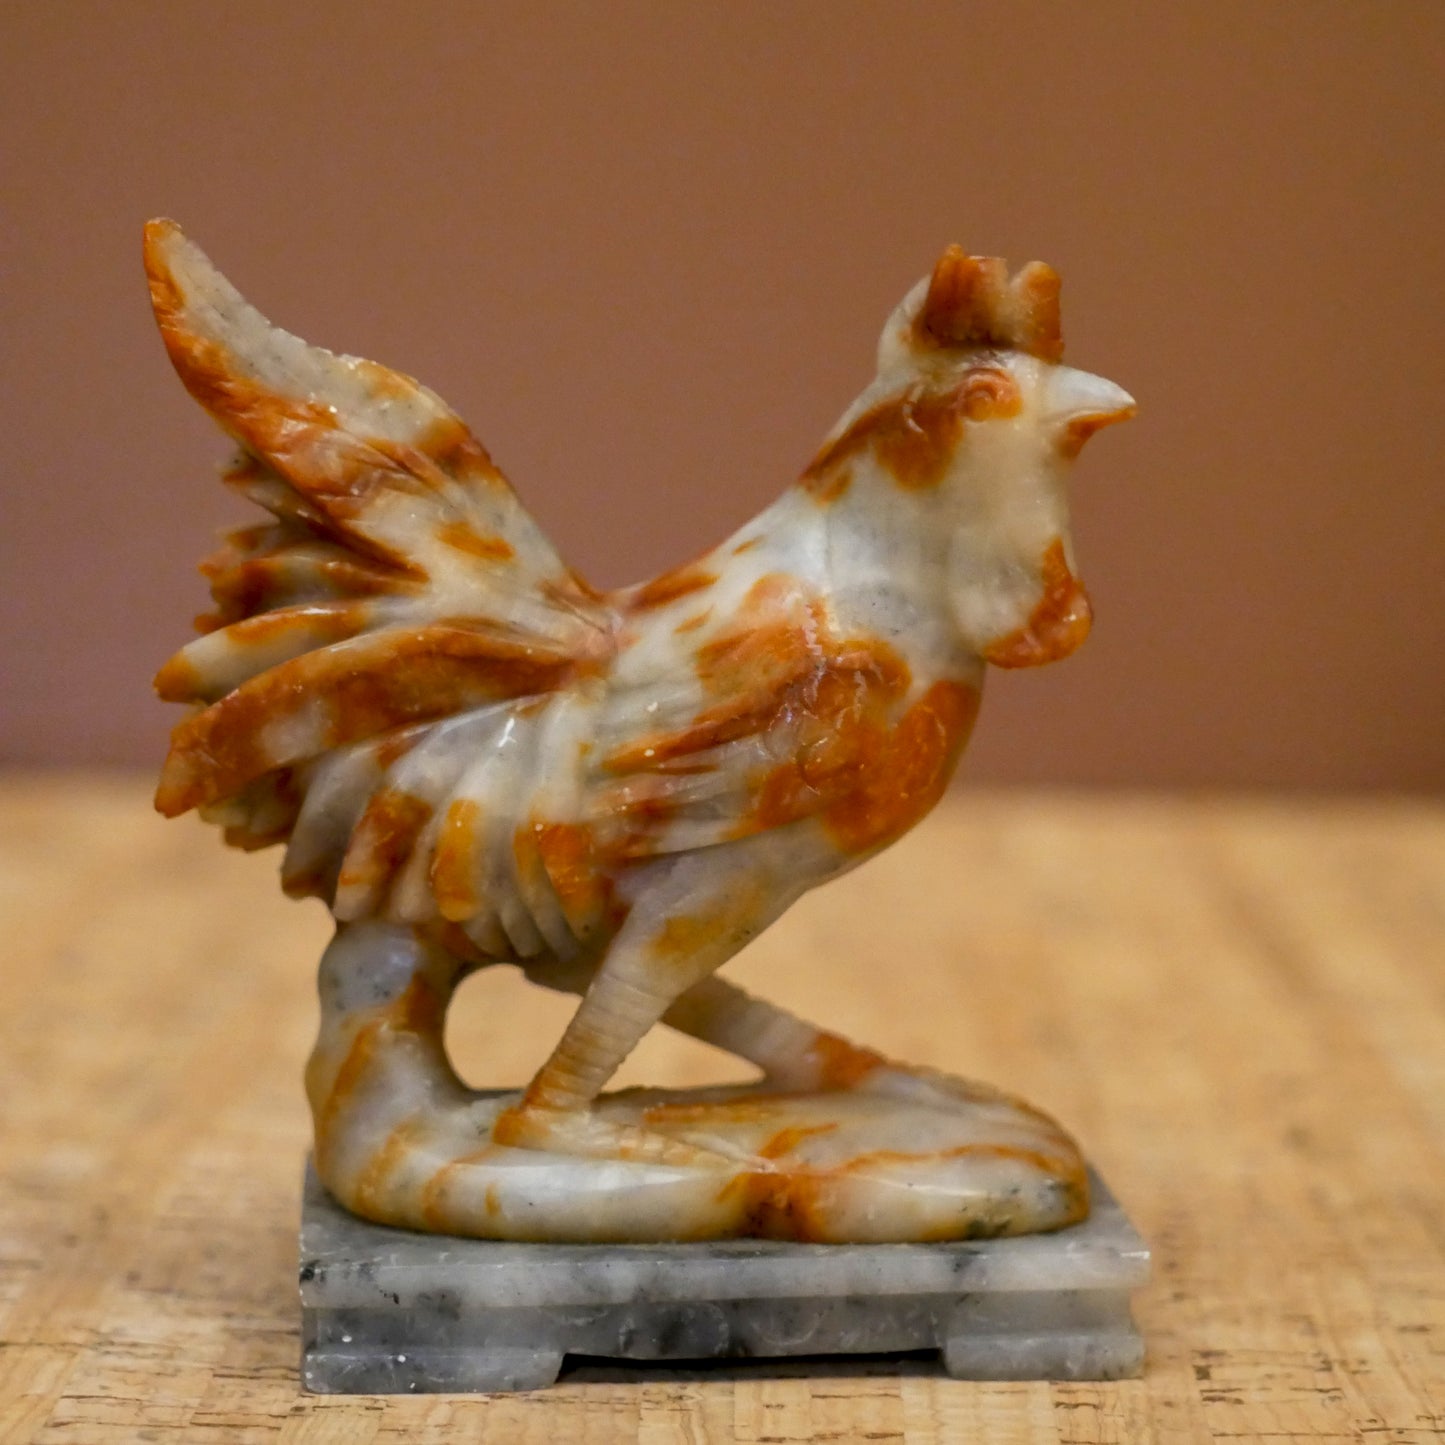 Chinese Natural Shoushan Stone Lovebirds Rooster Statue Sculpture Decor Set